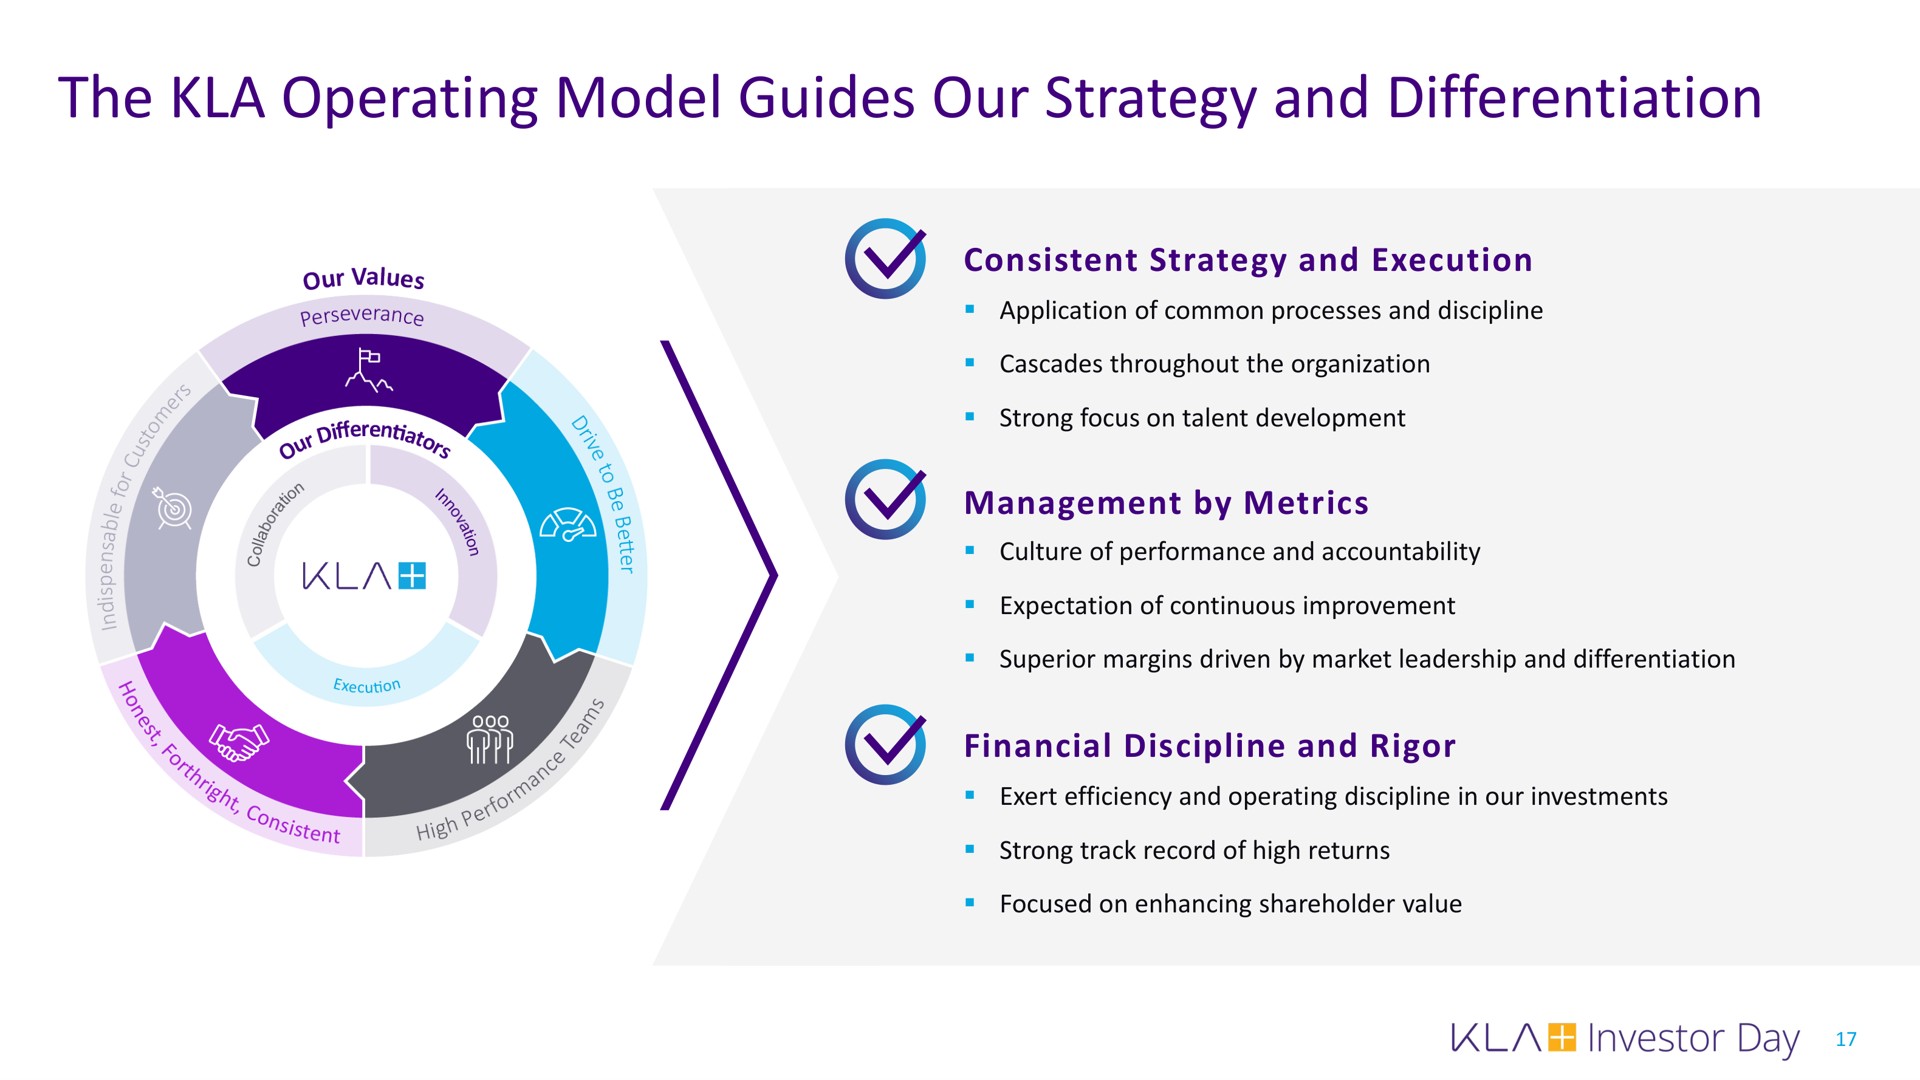 the operating model guides our strategy and differentiation | KLA